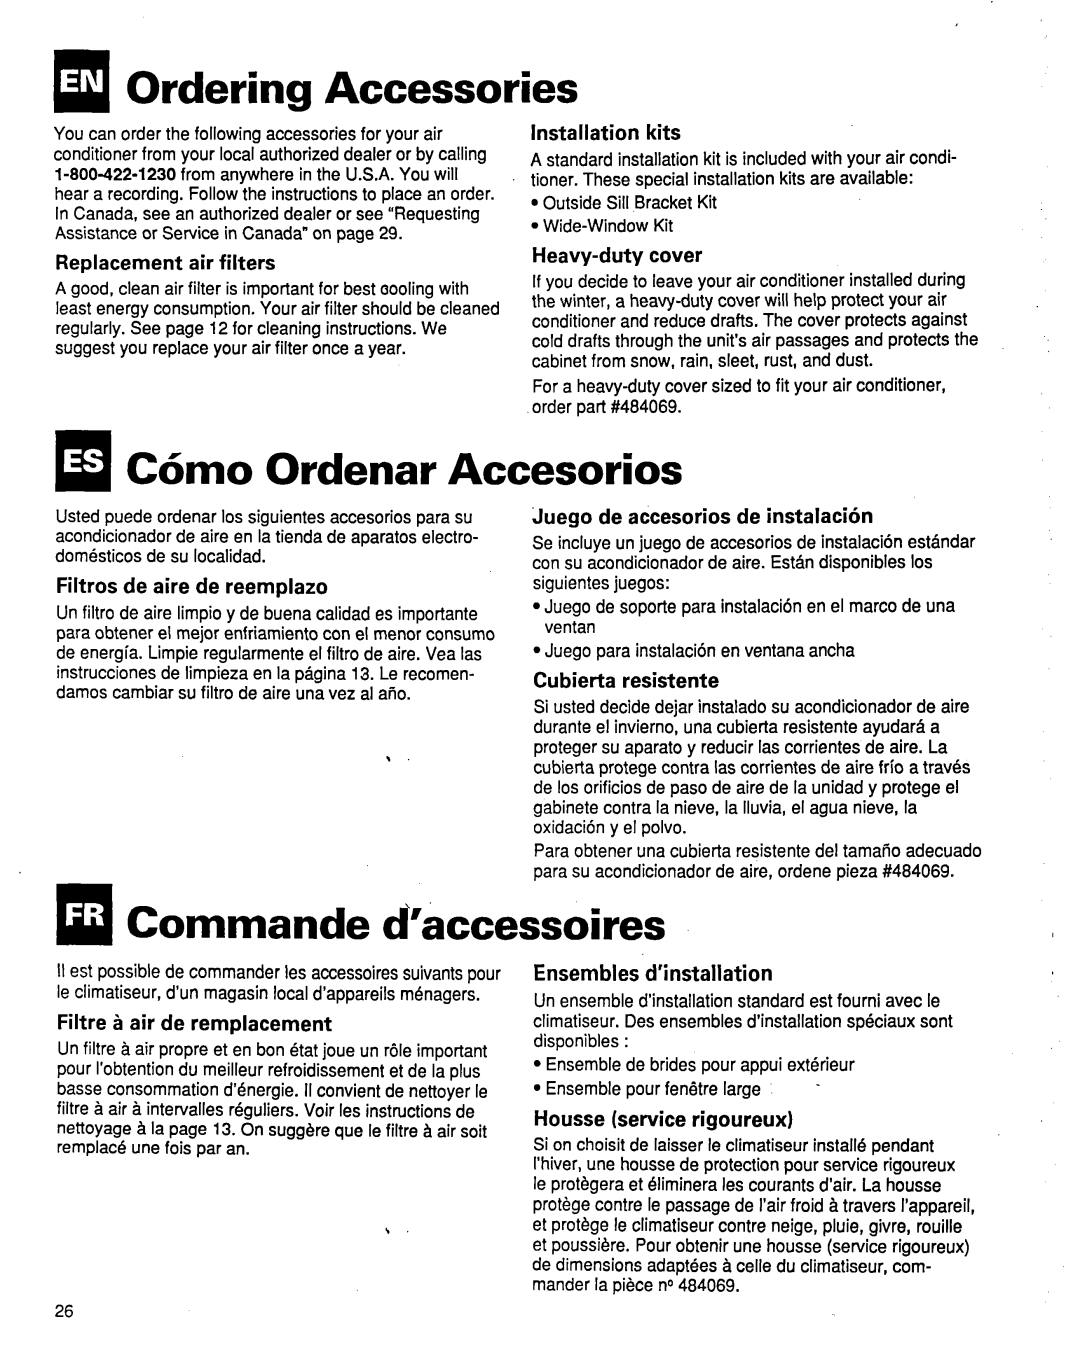 Whirlpool ACM184XE1 IaOrdering Accessories, Ordenar Accesorios, Commande d’accessoires, Installation kits, Heavy-dutycover 